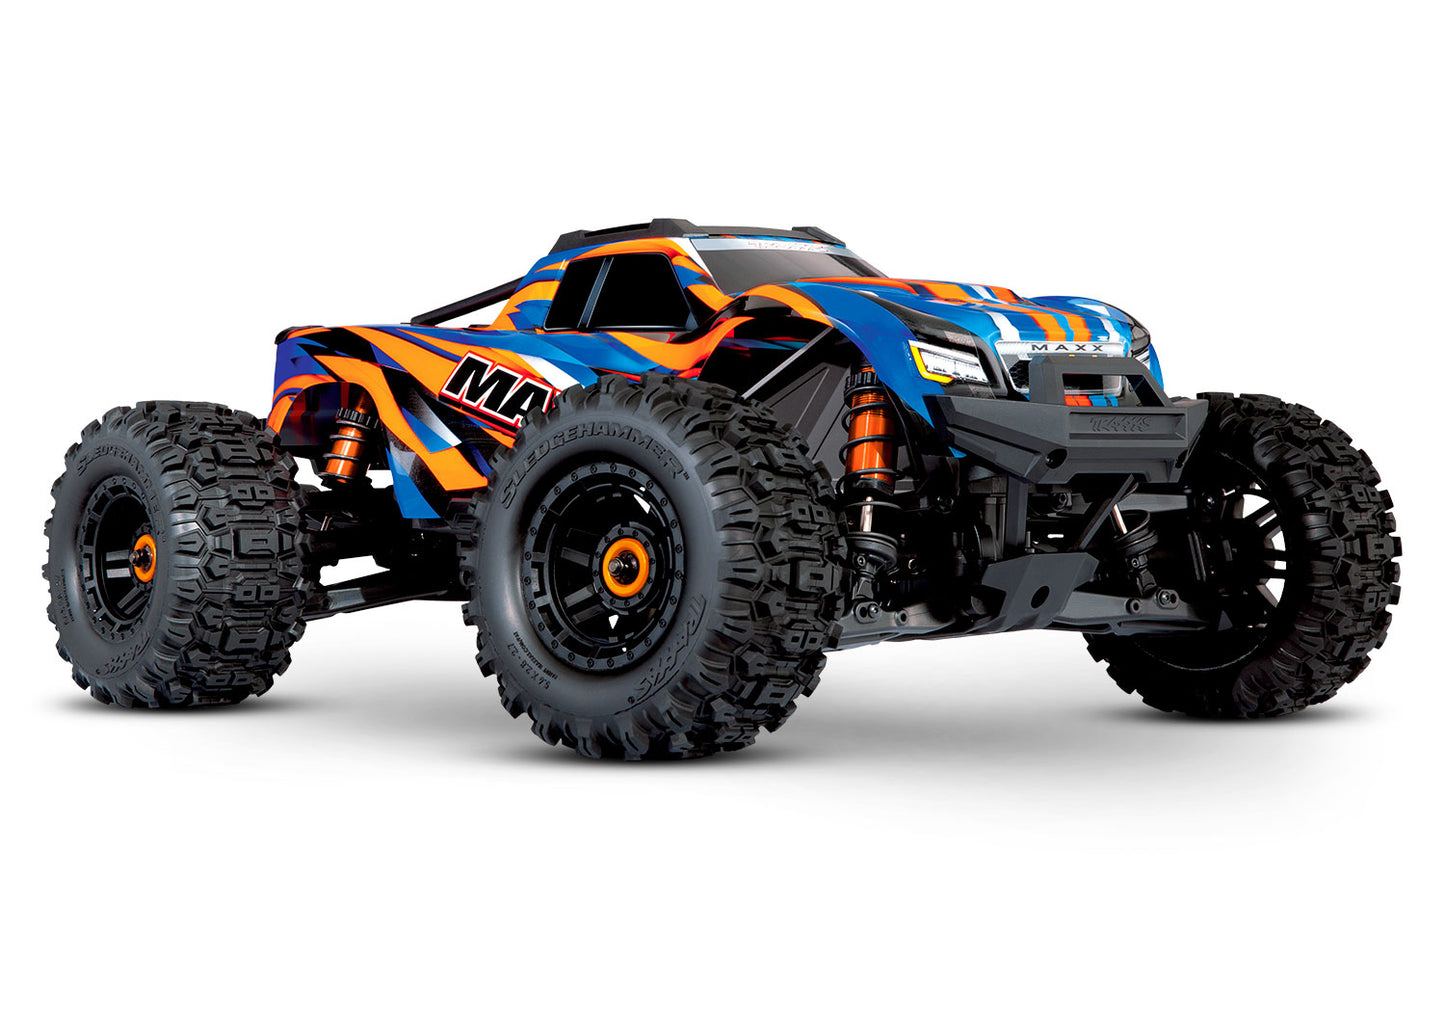 Traxxas Maxx With 4S Esc - Orange 1/10 Scale 4Wd Brushless Electric Monster Truck